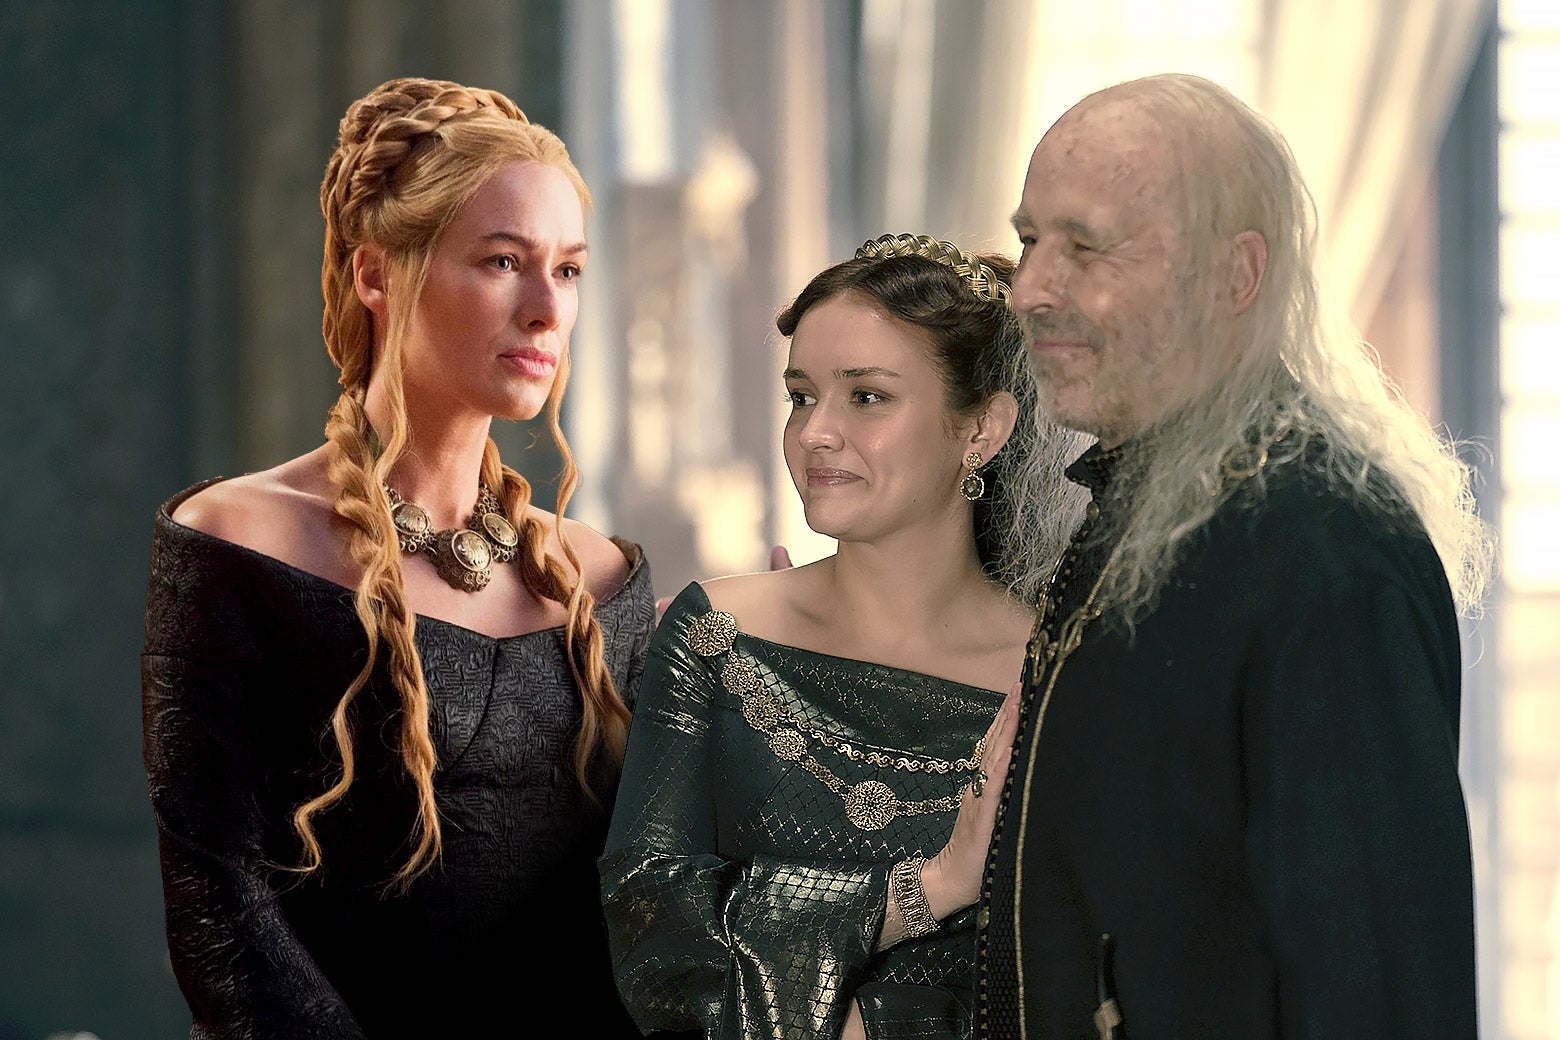 Cersei Lannister from Game of Thrones photoshopped into a scene from House of Dragons.